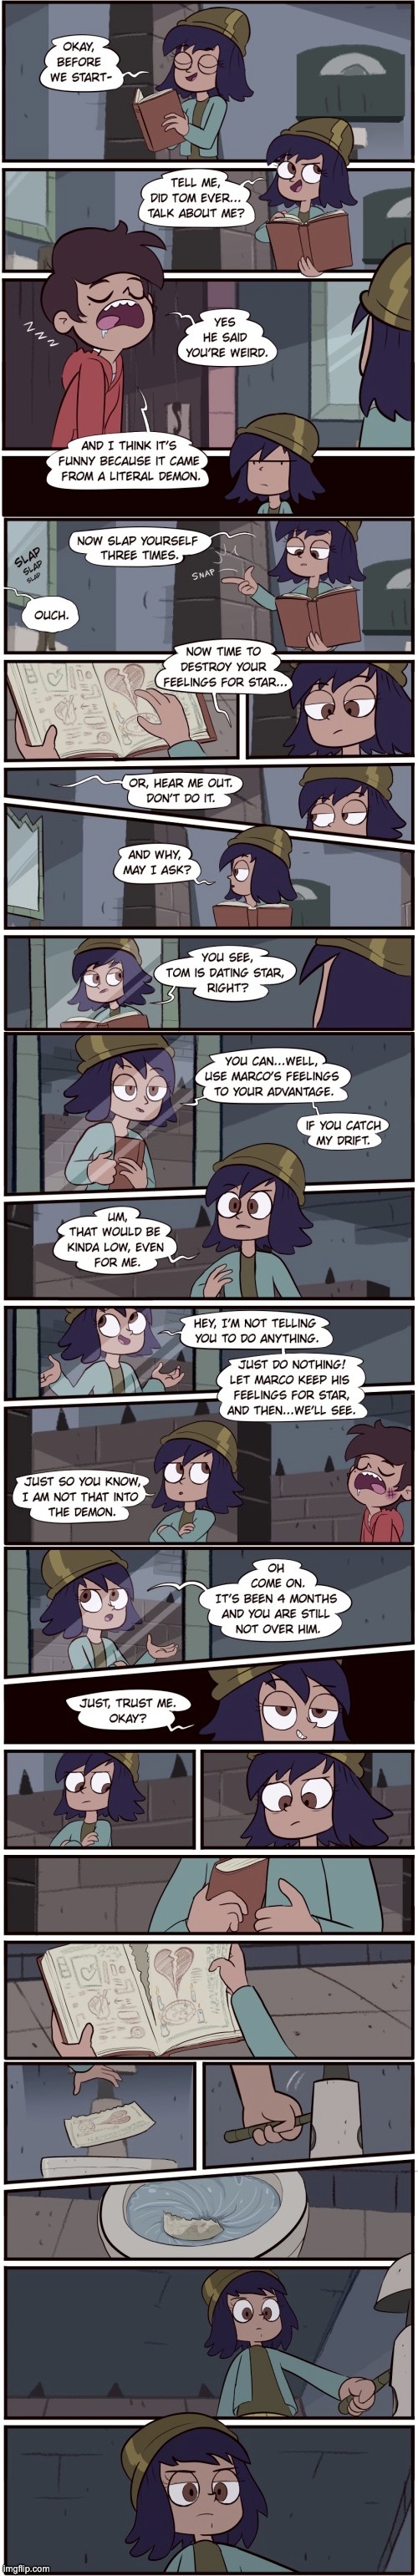 Tom vs Jannanigans: Happily Sever’d After (Part 2) | image tagged in morningmark,comics/cartoons,svtfoe,star vs the forces of evil,comics,memes | made w/ Imgflip meme maker